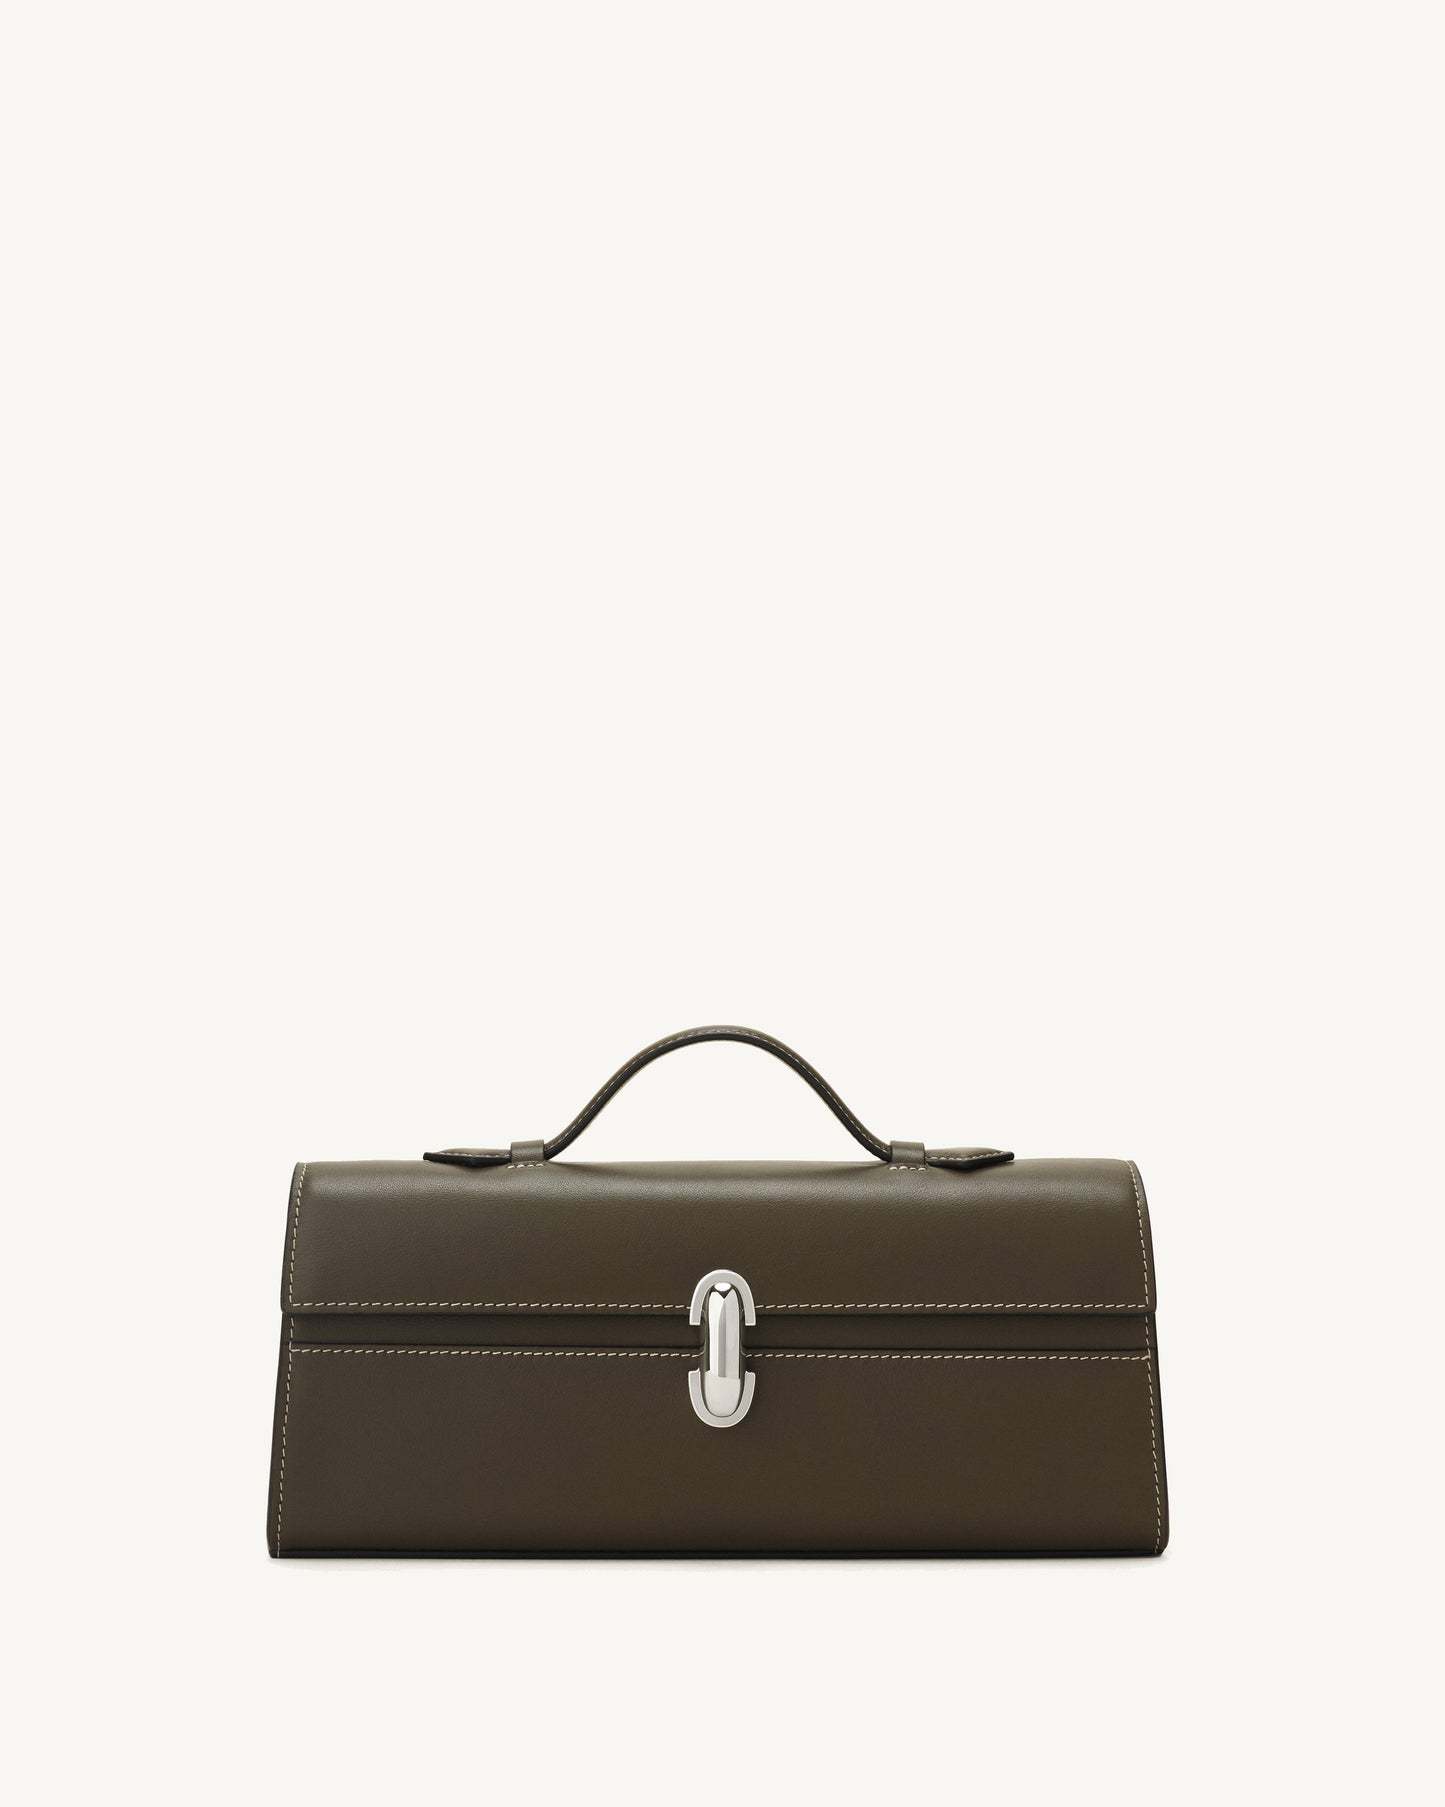 SLIM SYMMETRY POCHETTE IN SMOOTH CALF LEATHER